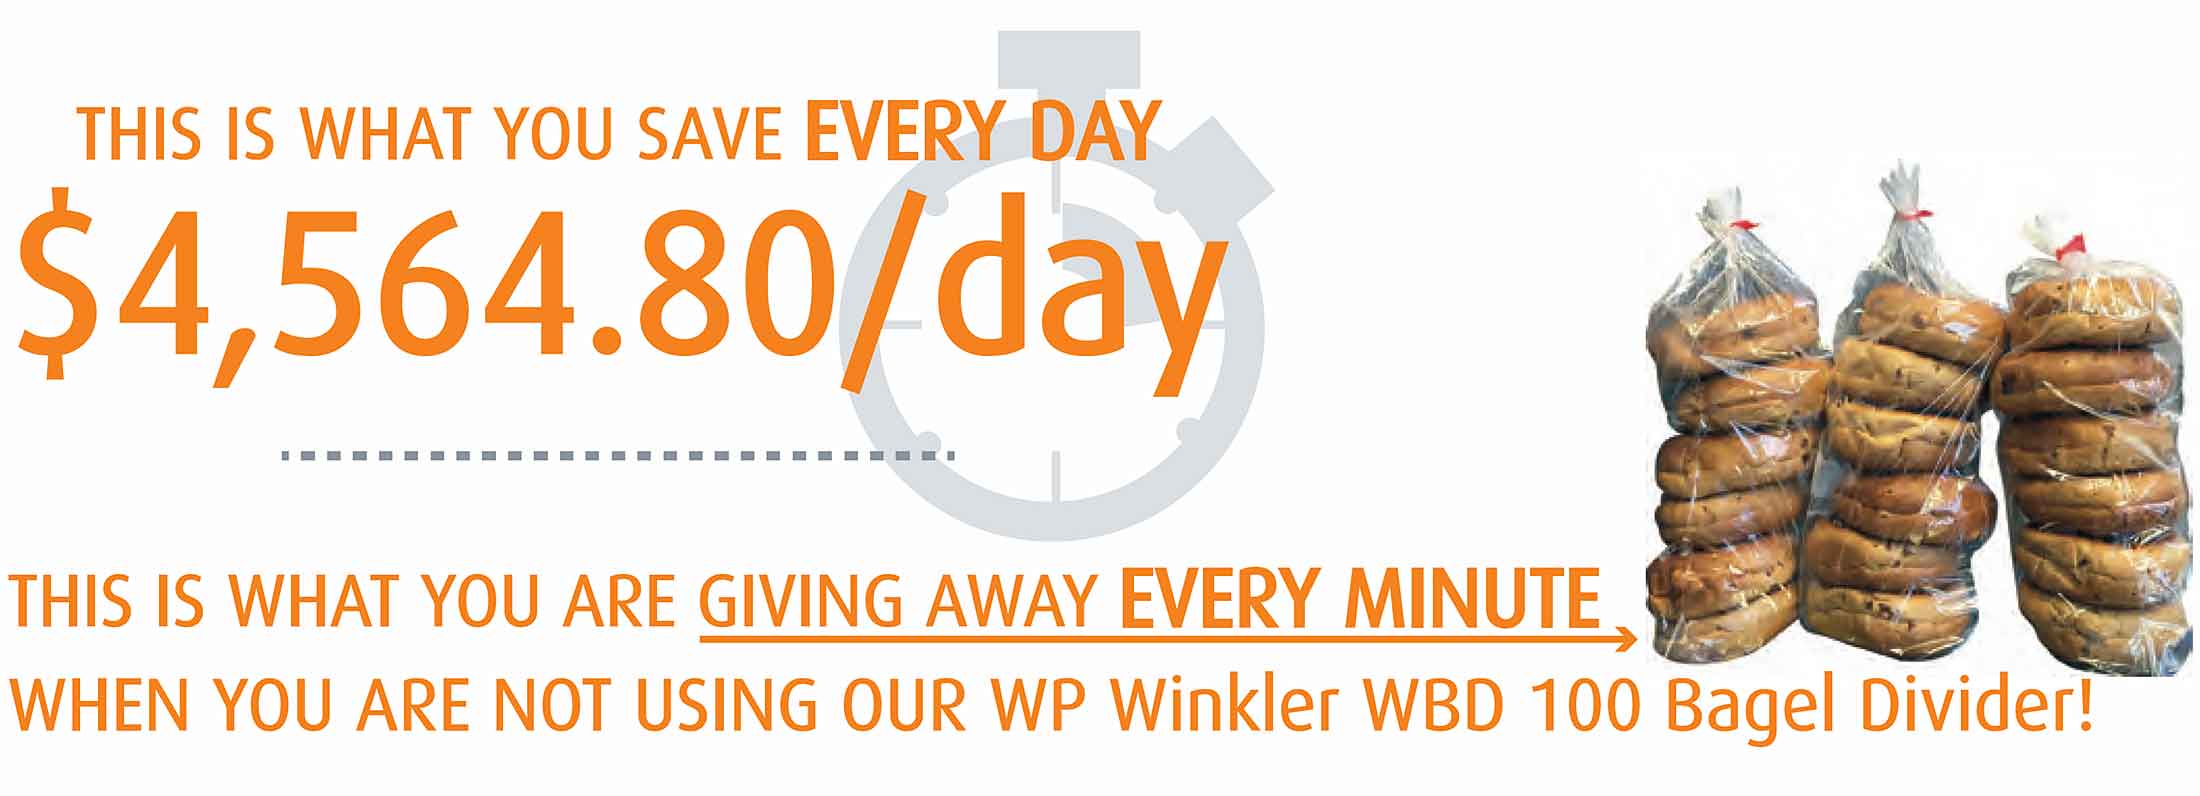 When you use our re-engineered WP Winkler WBD 100 Generation 3 Bagel Divider, you’ll save over $4,500 each day of operation. It truly pays for itself!